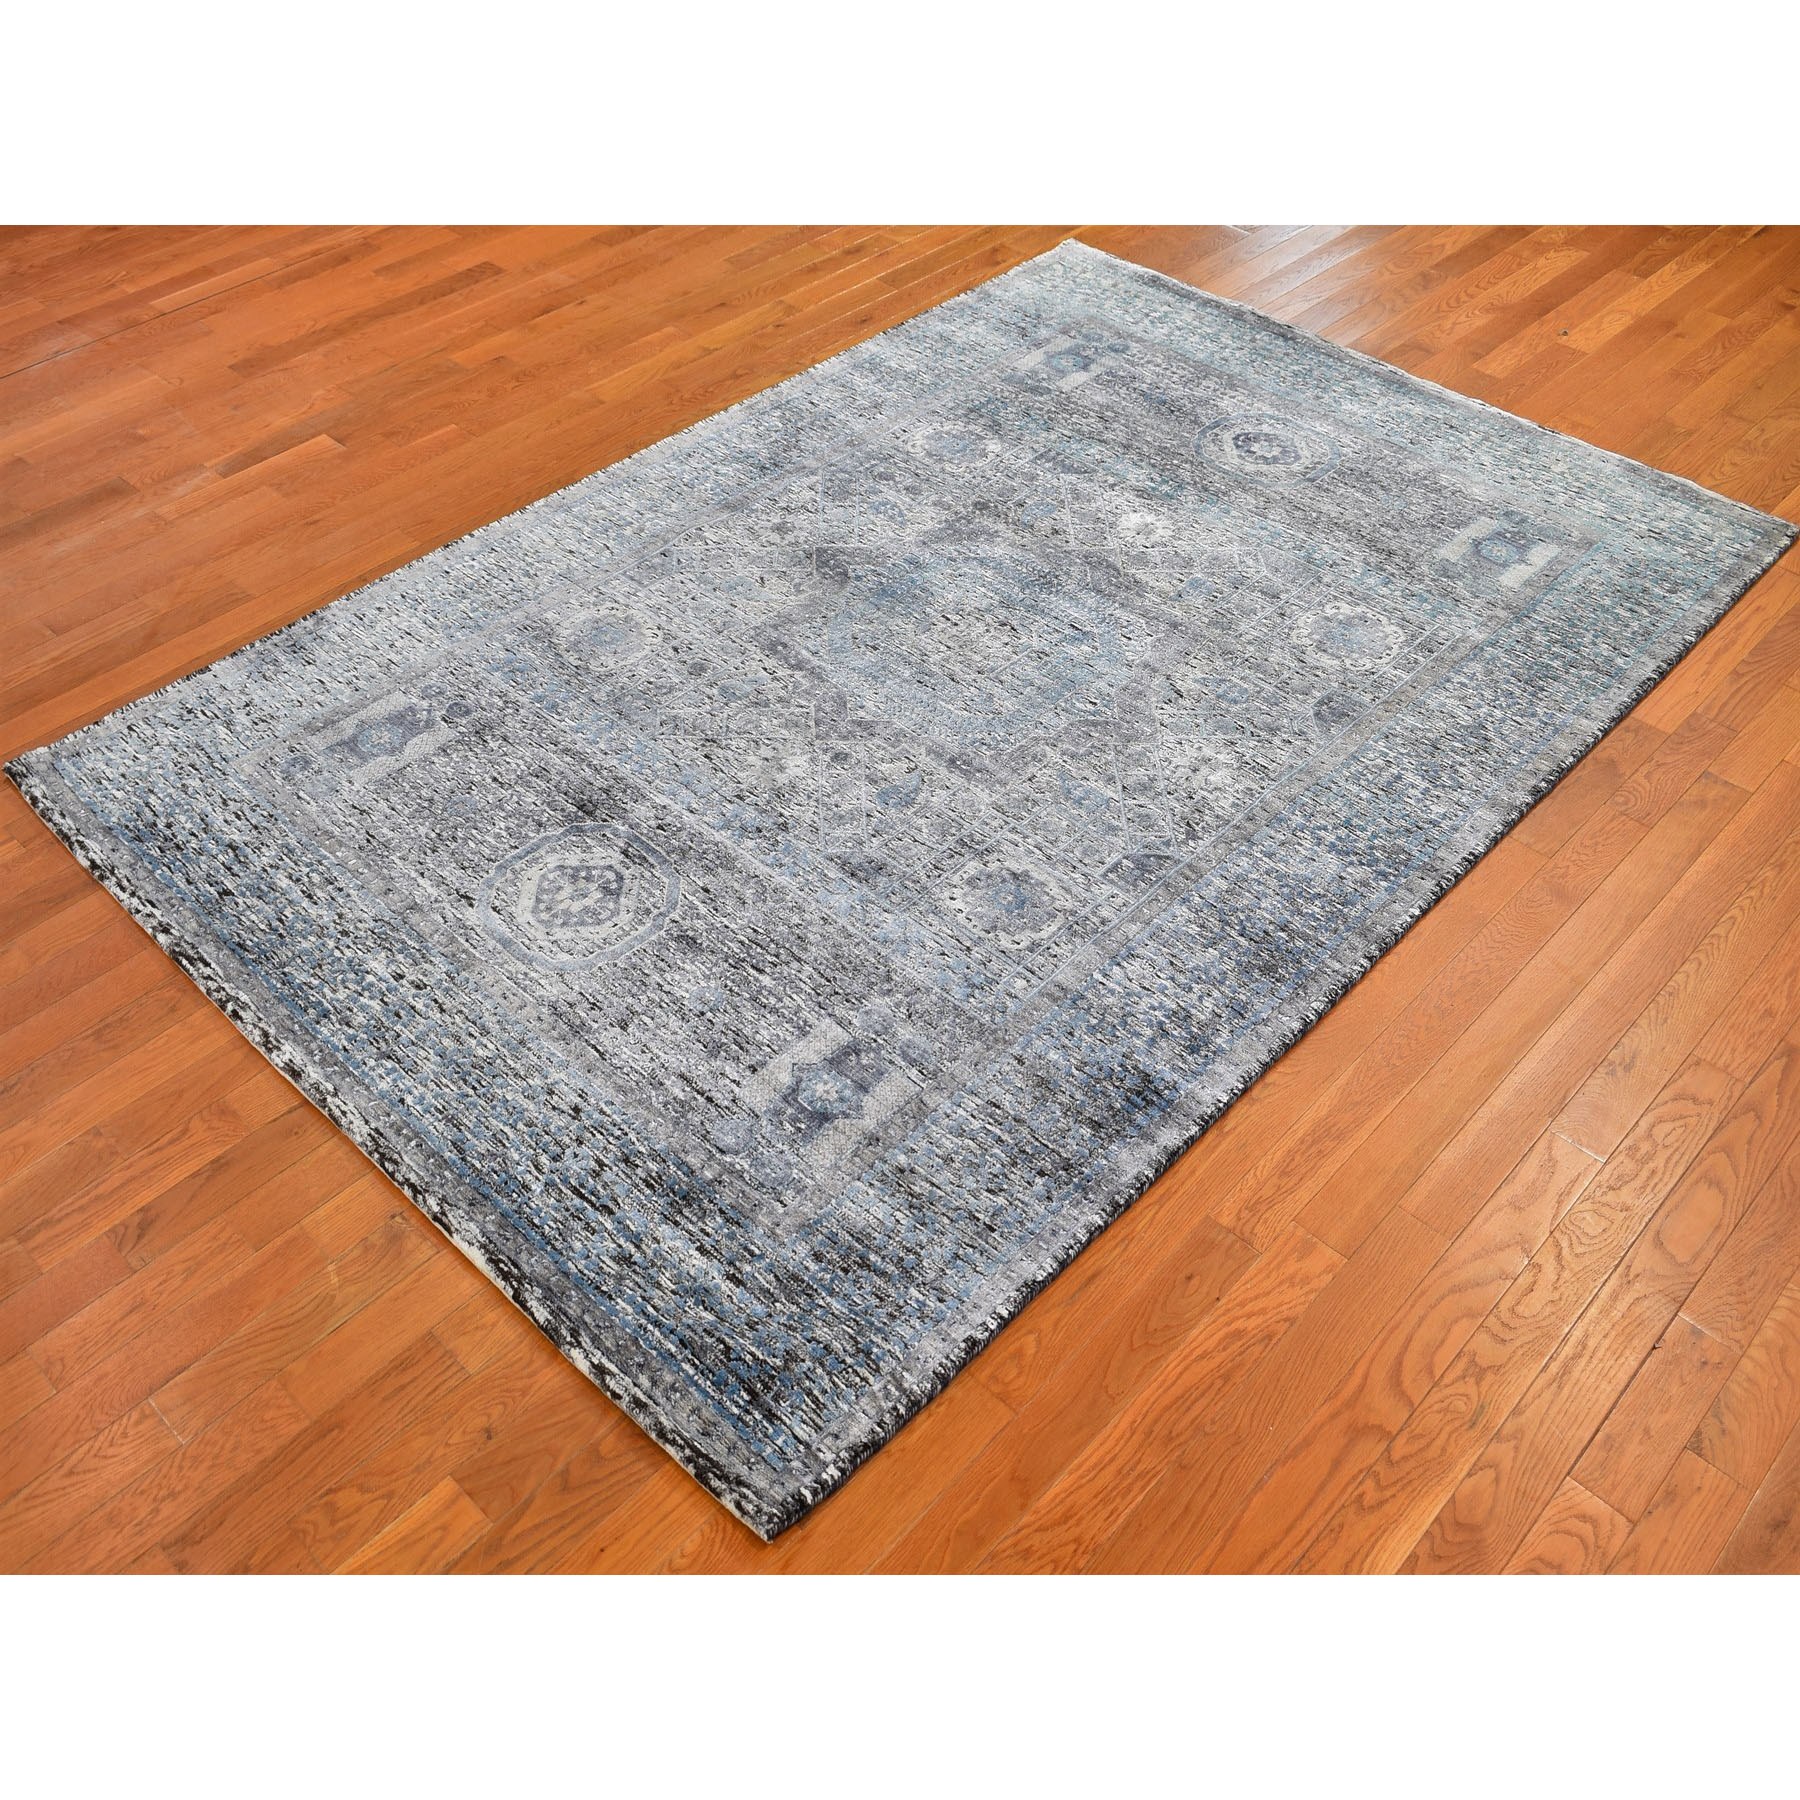 6-1 x9-2  Silk With Textured Wool Hi-Low Pile Mamluk Design Hand Knotted Oriental Rug 